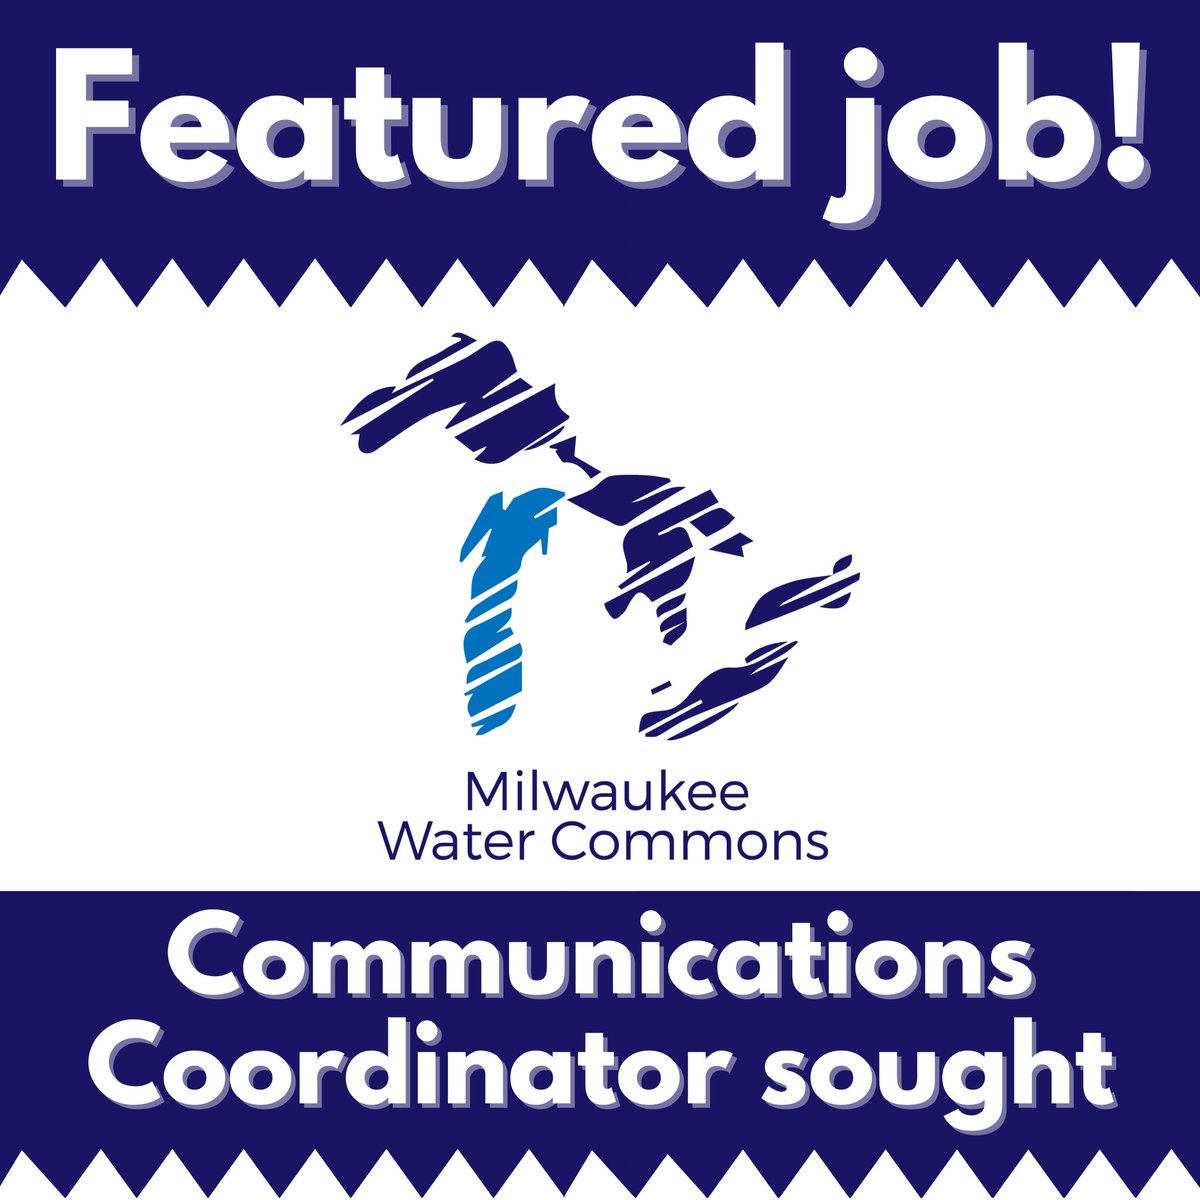 A Communications Coordinator is sought by @MKEWaterCommons. Learn more or apply ➡️ bit.ly/3ZQqdmT now for this important #job opening in #Milwaukee!

#NonprofitJobs #MKE #MKEjobs #MilwaukeeJobs #CommunicationJobs #CommunicationsJobs #DigitalMediaJobs #NonprofitMarketing